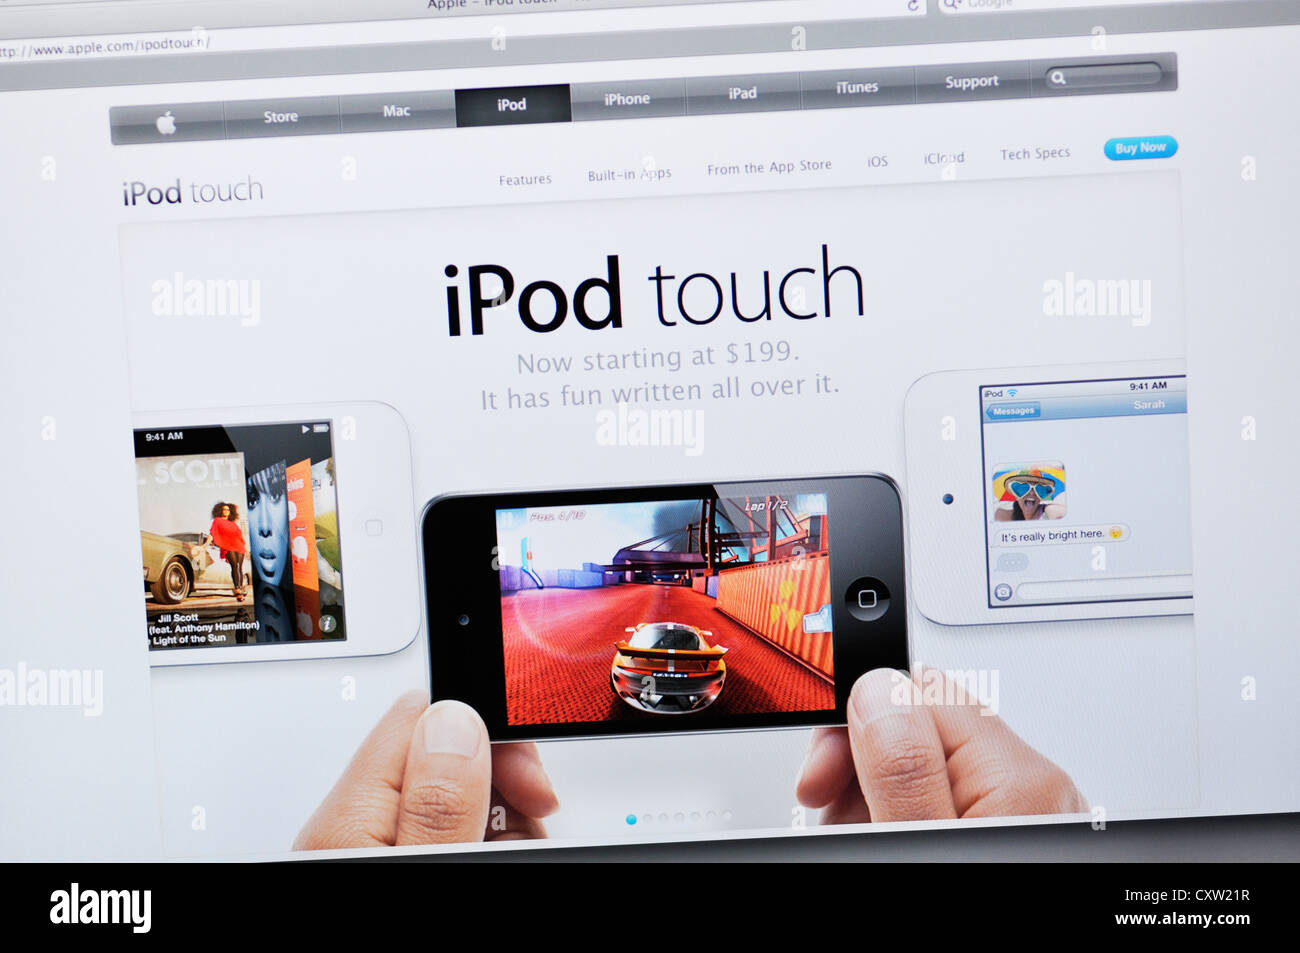 Apple Store website - iPod touch Stock Photo